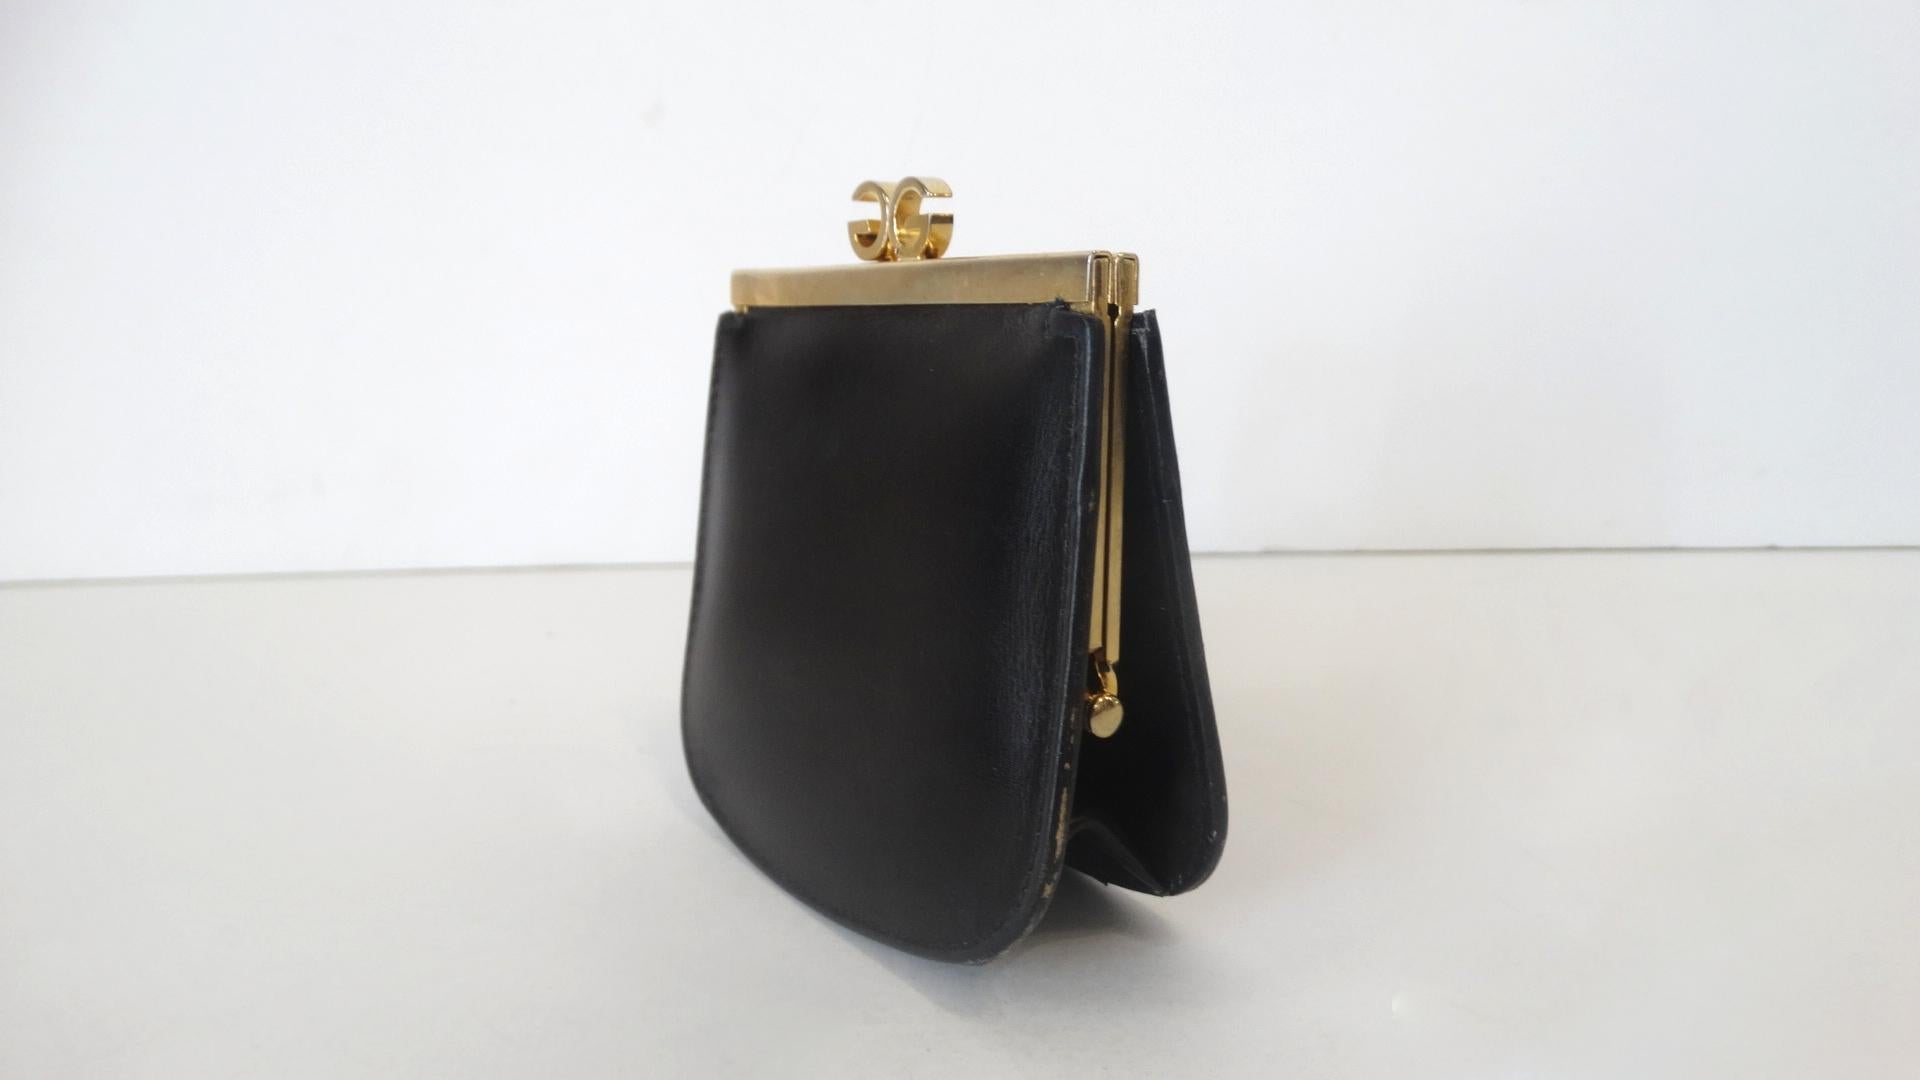 Always Carry Some Vintage With You! Circa 1970s, this Gucci coin purse is made of black smooth leather and features gold plated hardware. The signature GG is included on the top for a clasp closure. Interior is black leather and signed Gucci Made in